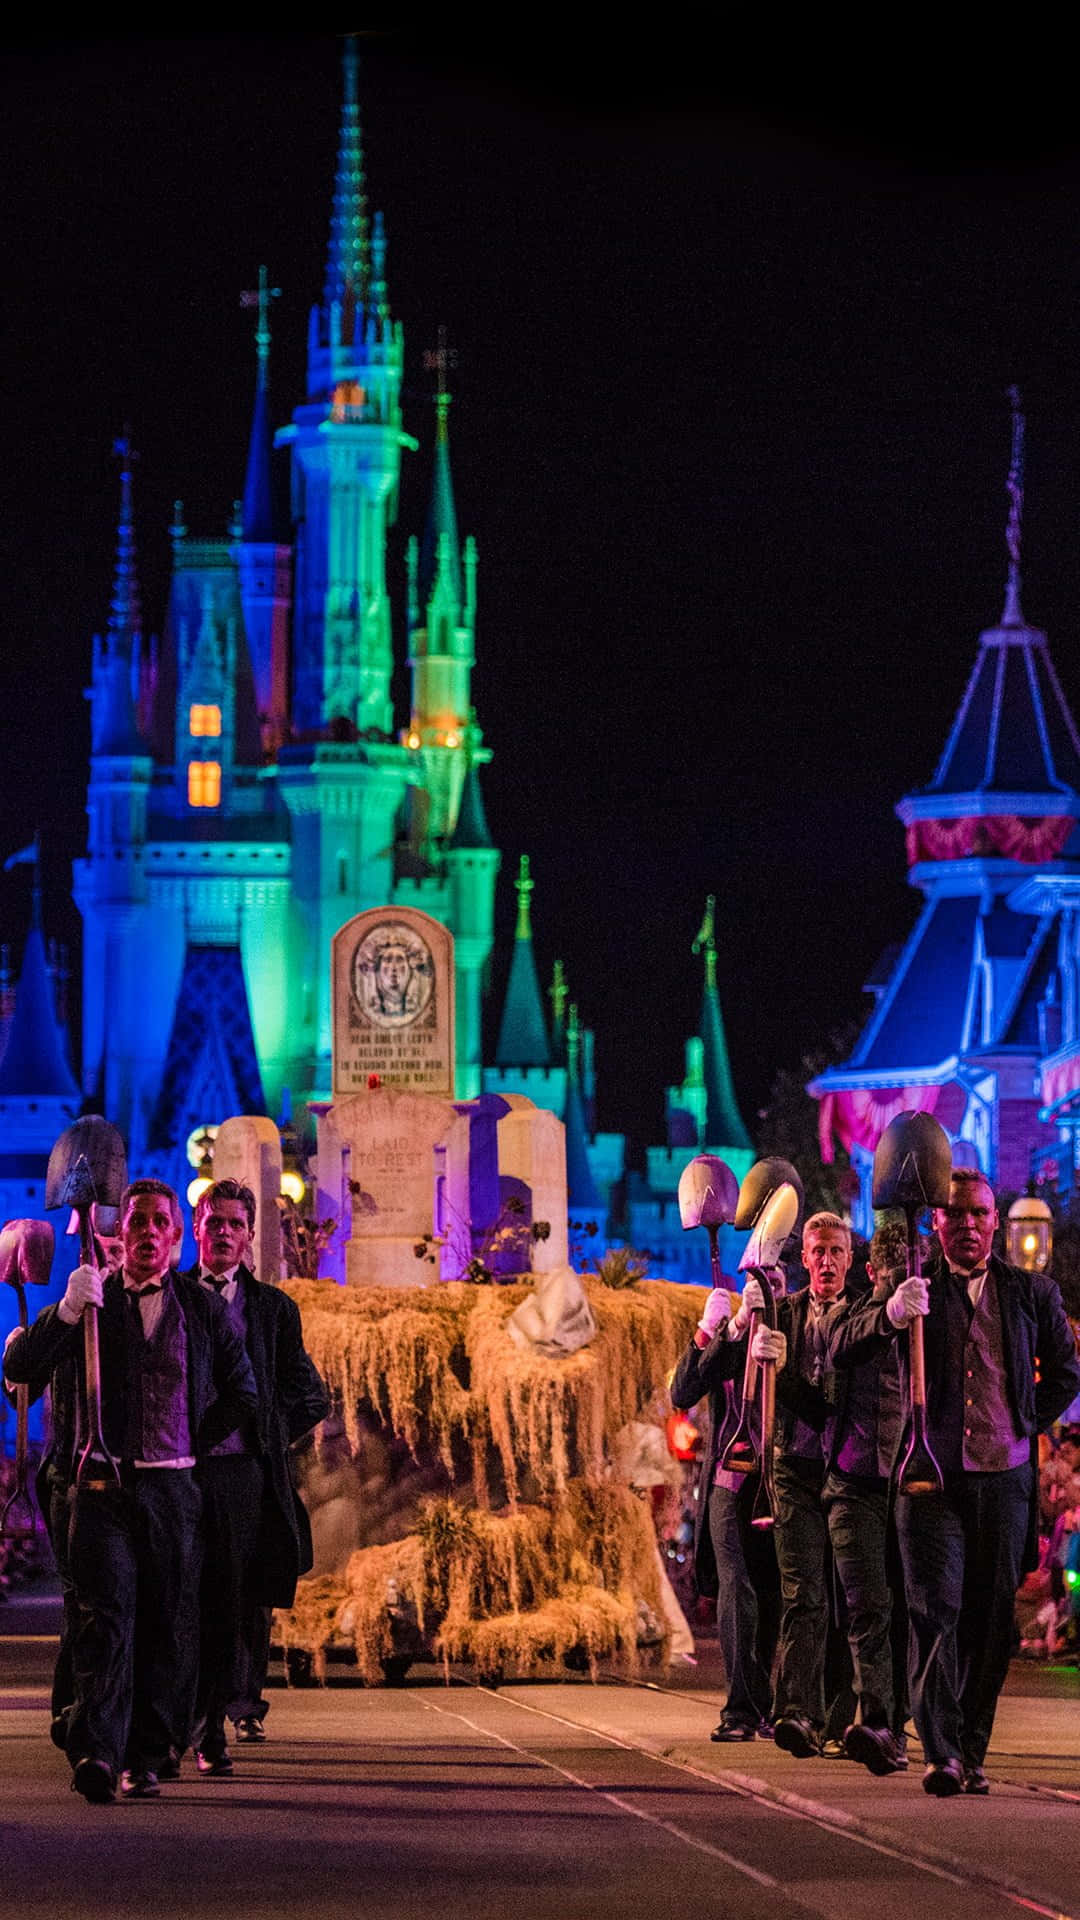 Disneyworld Boo To You Halloween Performance Iphone Would Be Translated To 